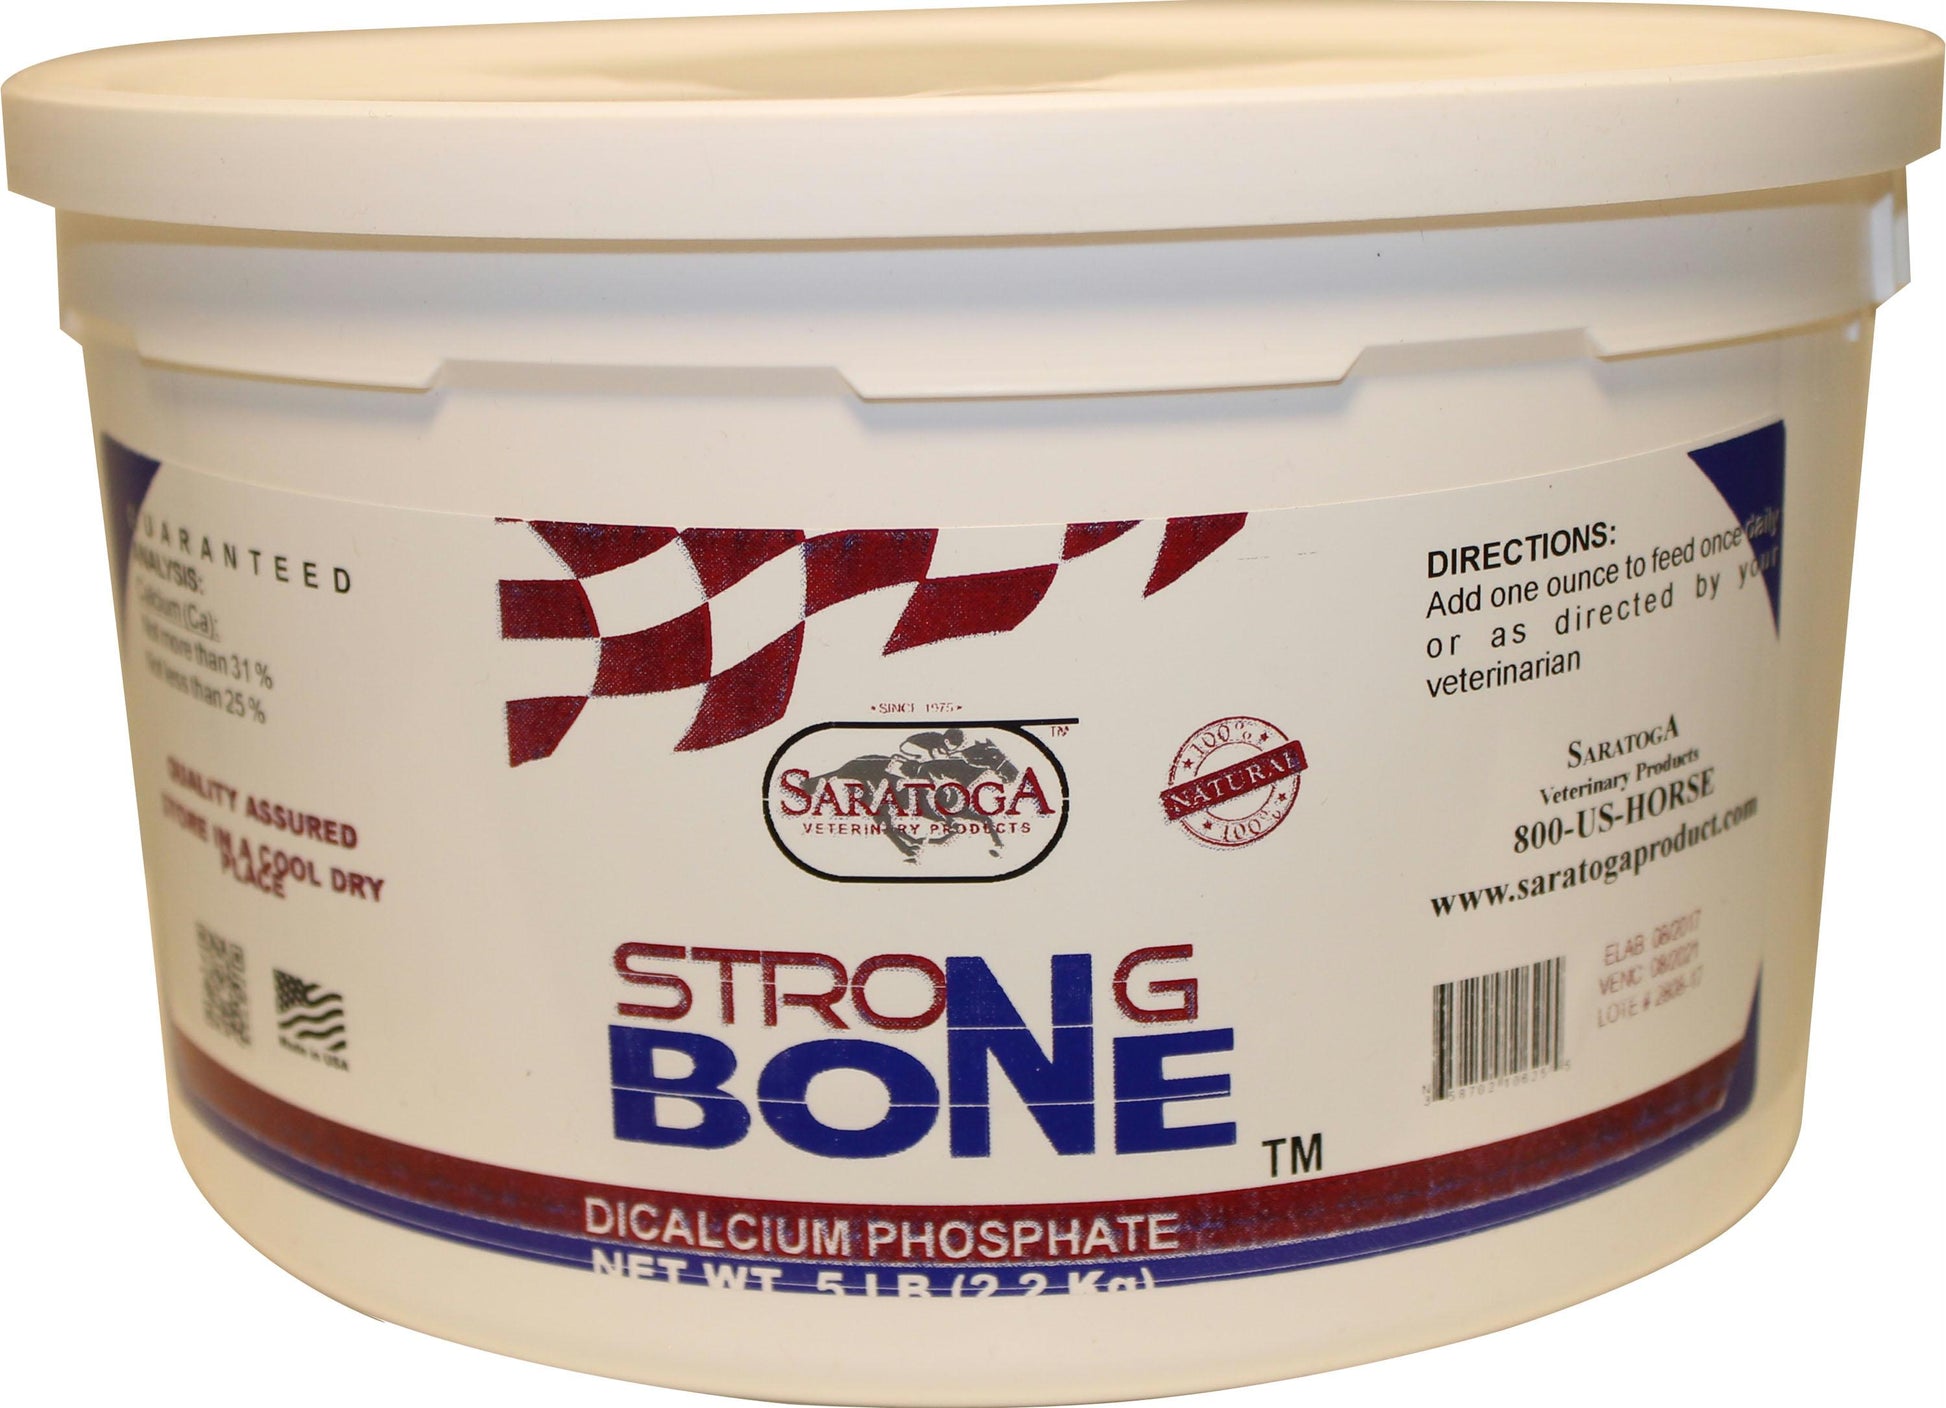 Strong Bone - aomega-products